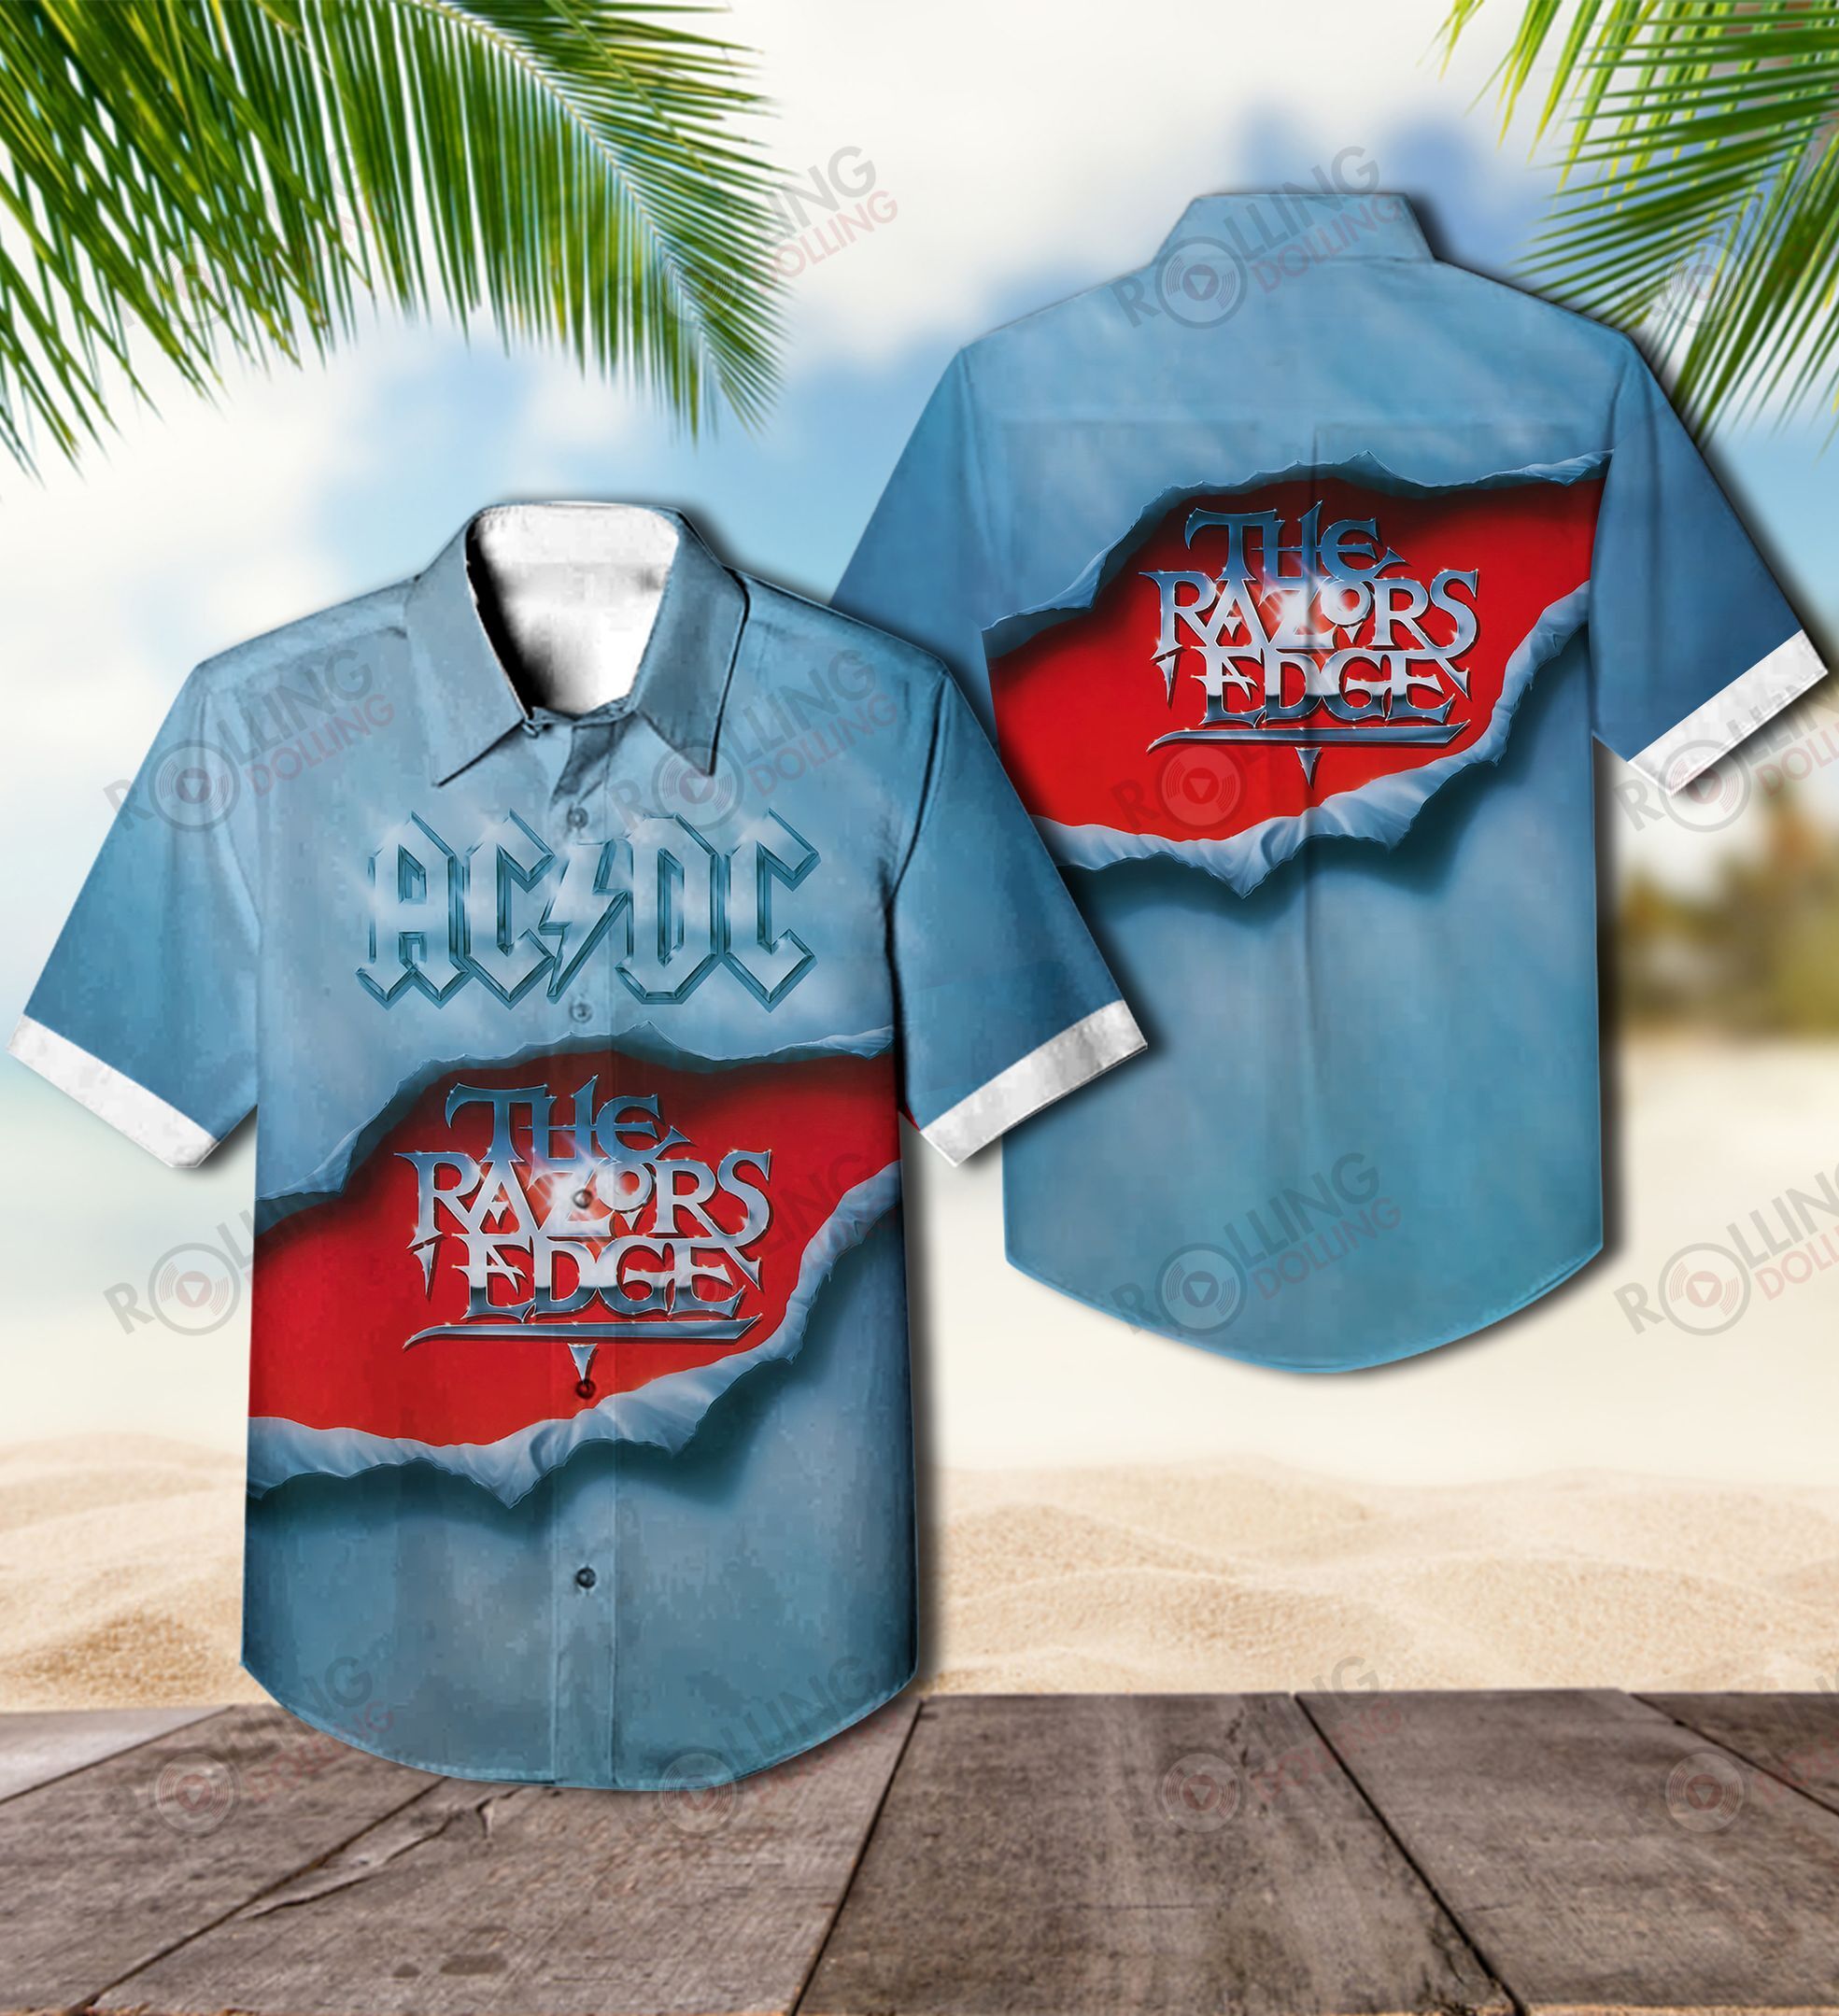 The Hawaiian Shirt is a popular shirt that is worn by Rock band fans 30